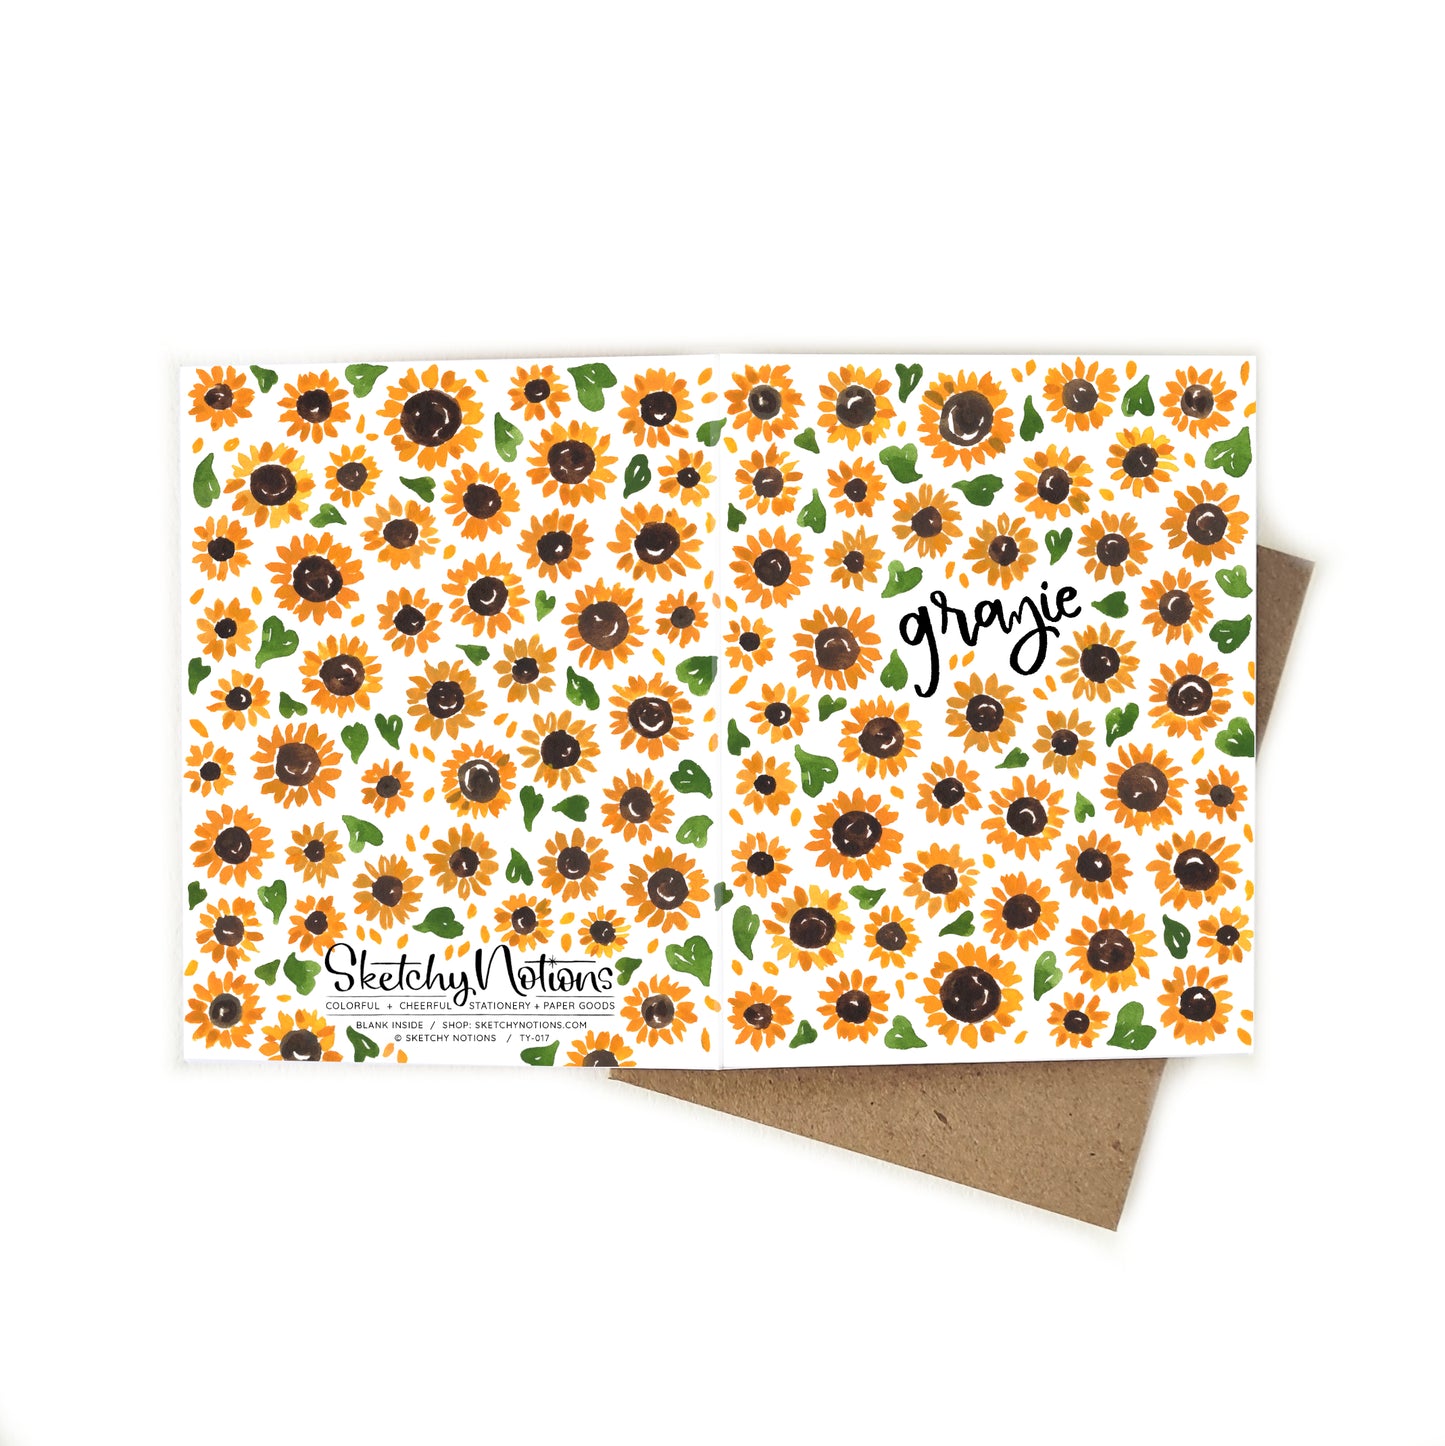 Grazie Italian Thank You Card with Sunflowers